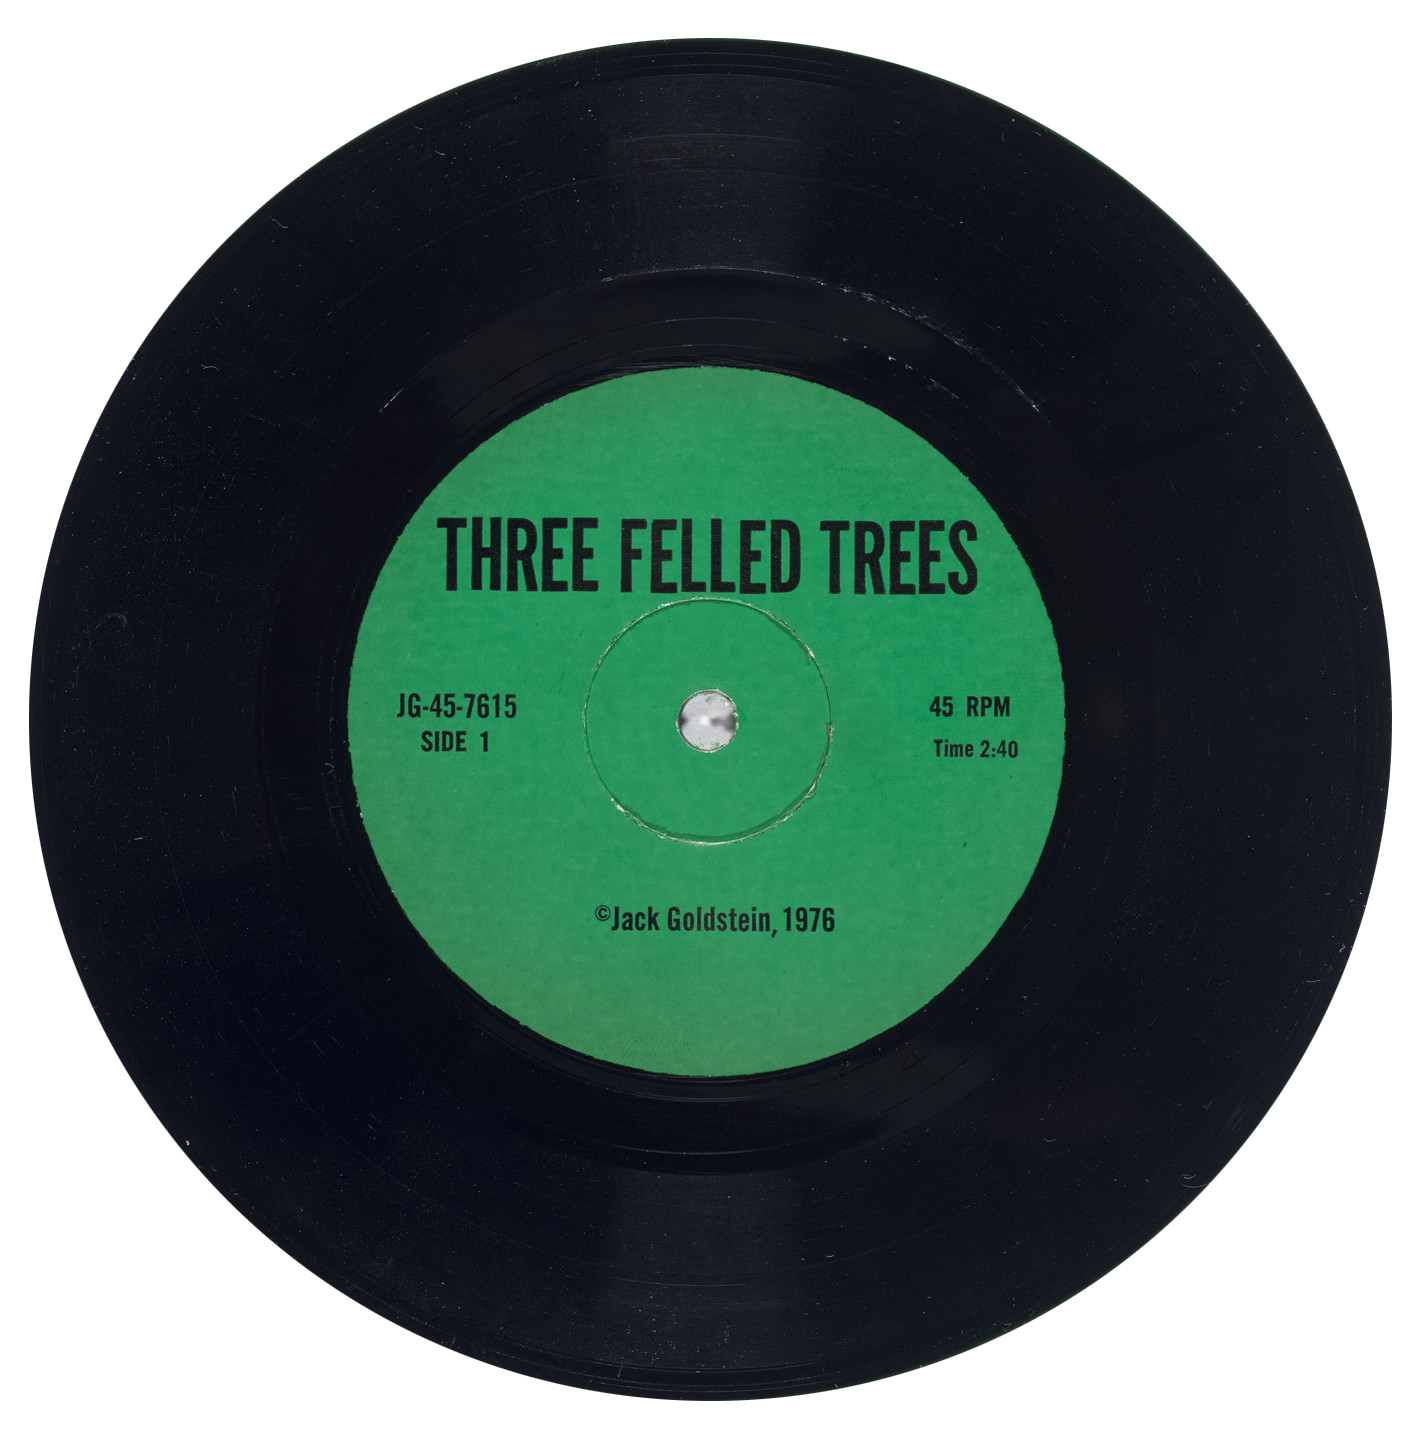  THRee Felled Trees
Green vinyl - 45 rpm 7-inch record

Three Felled Trees est un des neuf éléments constitutifs de :
A Suite of Nine 45 rpm 7-Inch Records with Sound Effects
1976